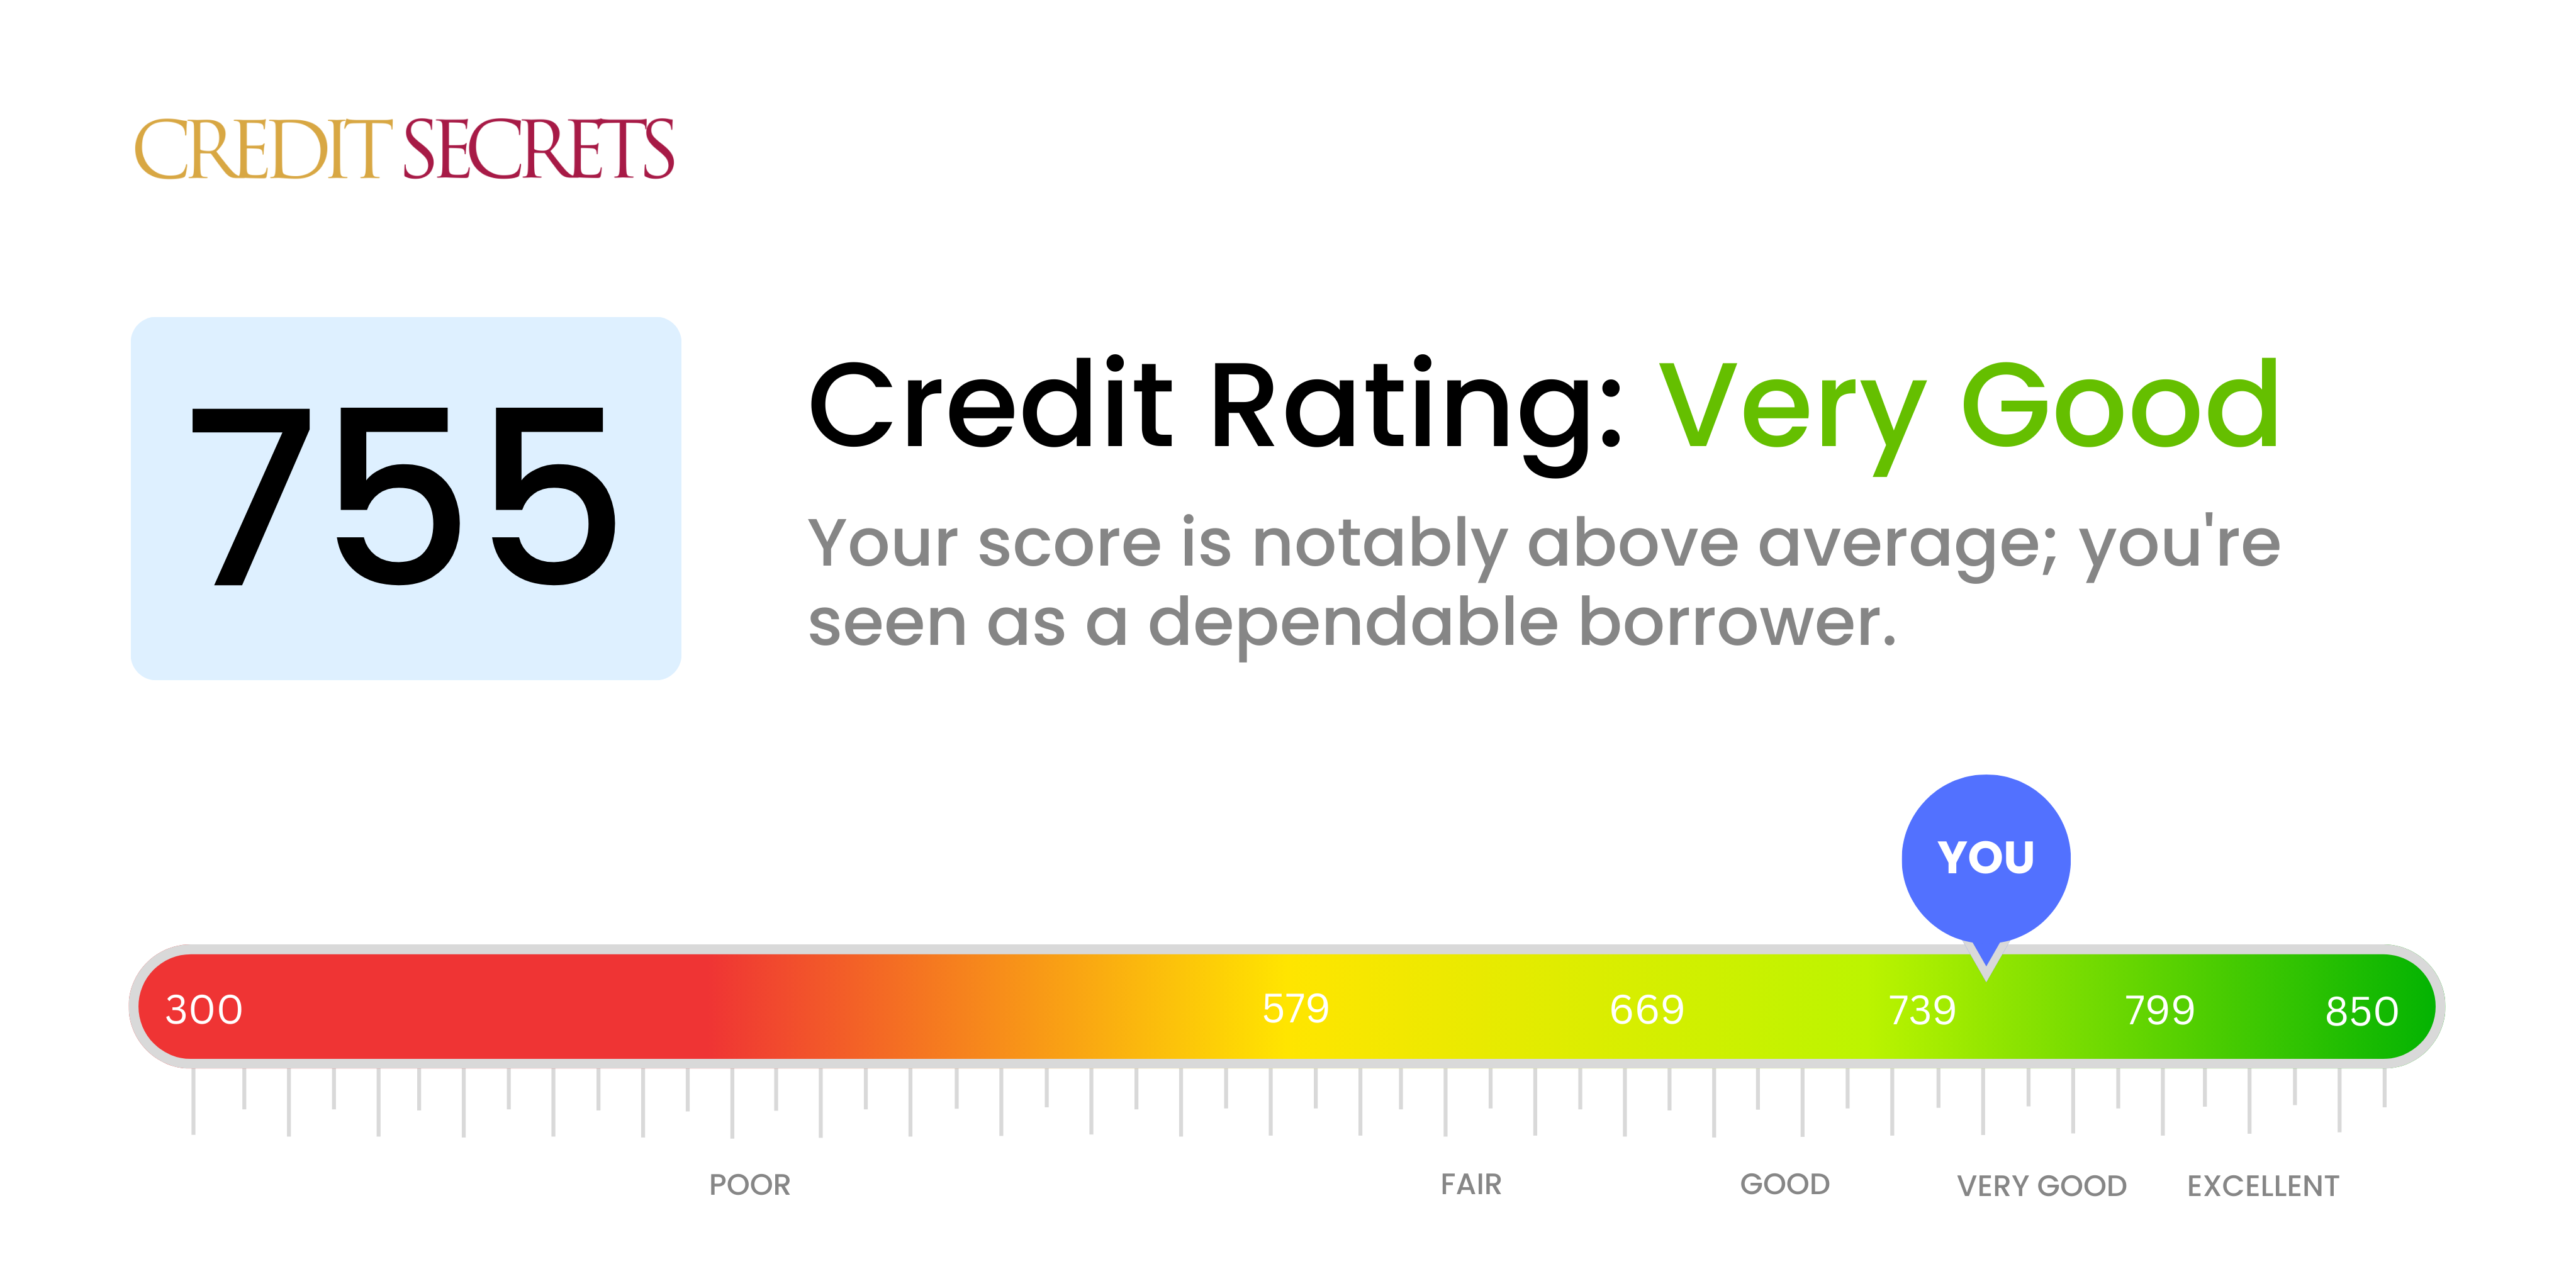 Is 755 a good credit score?